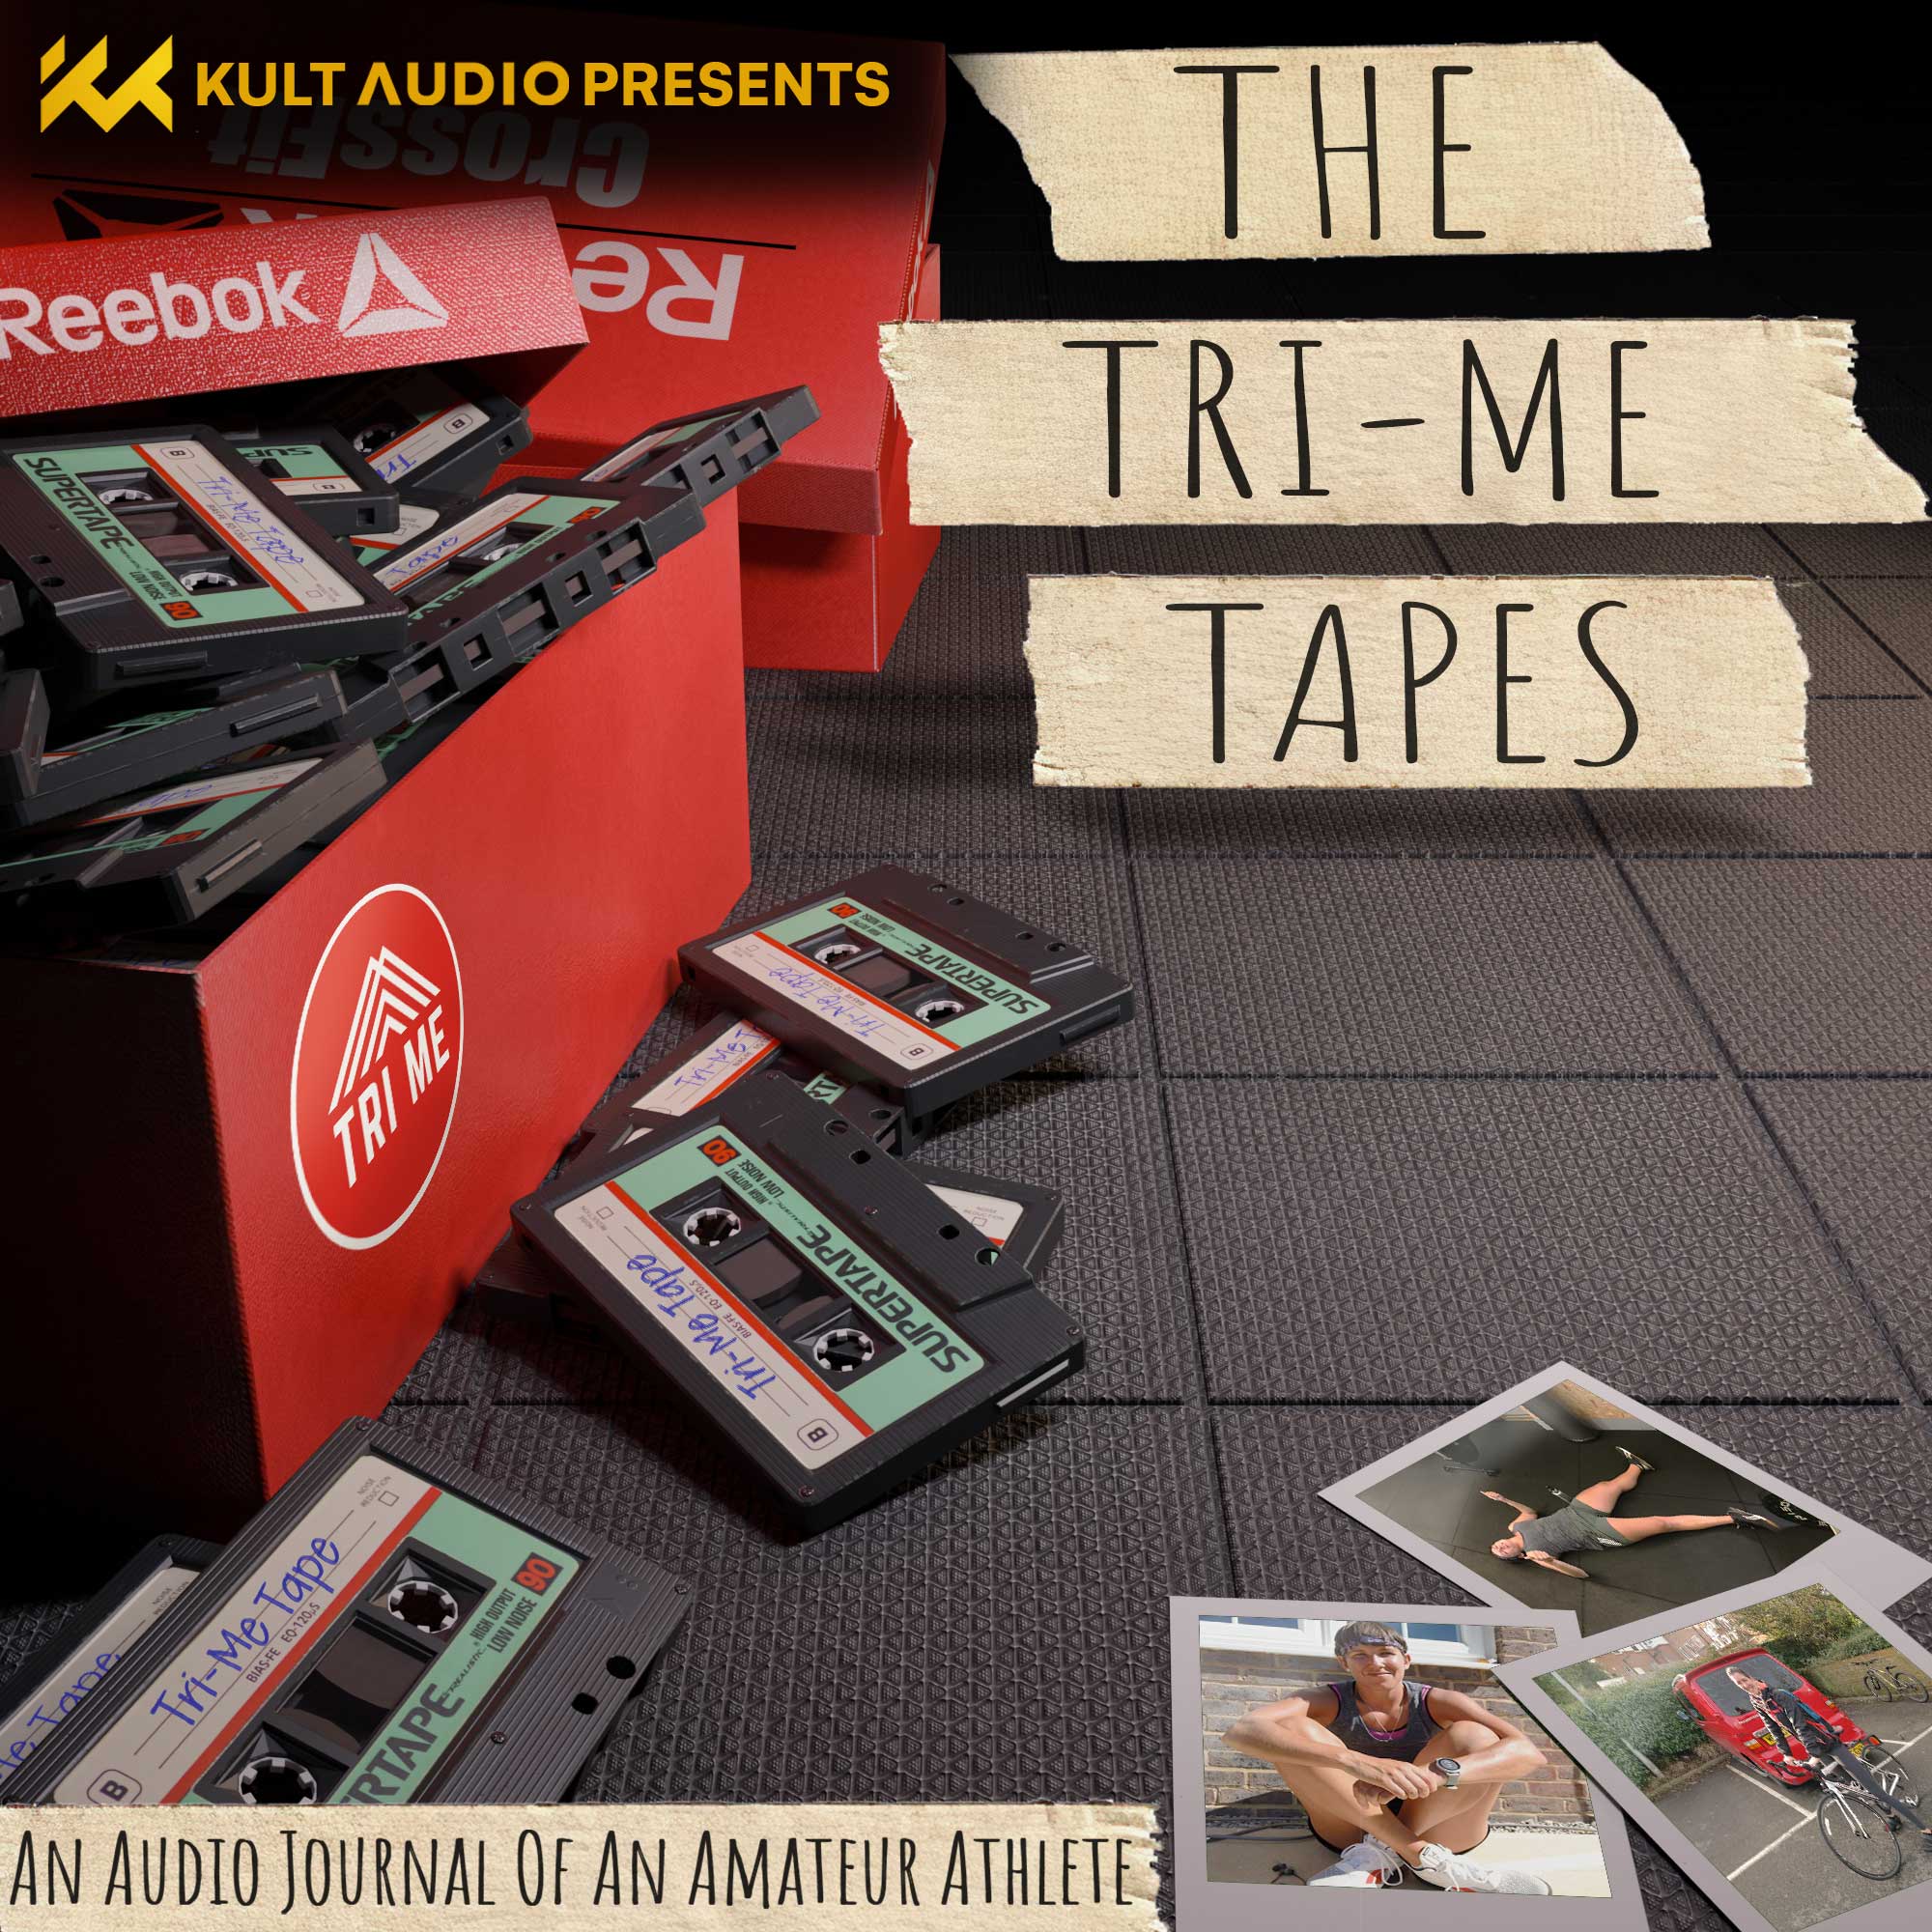 Show artwork for The Tri-Me Tapes